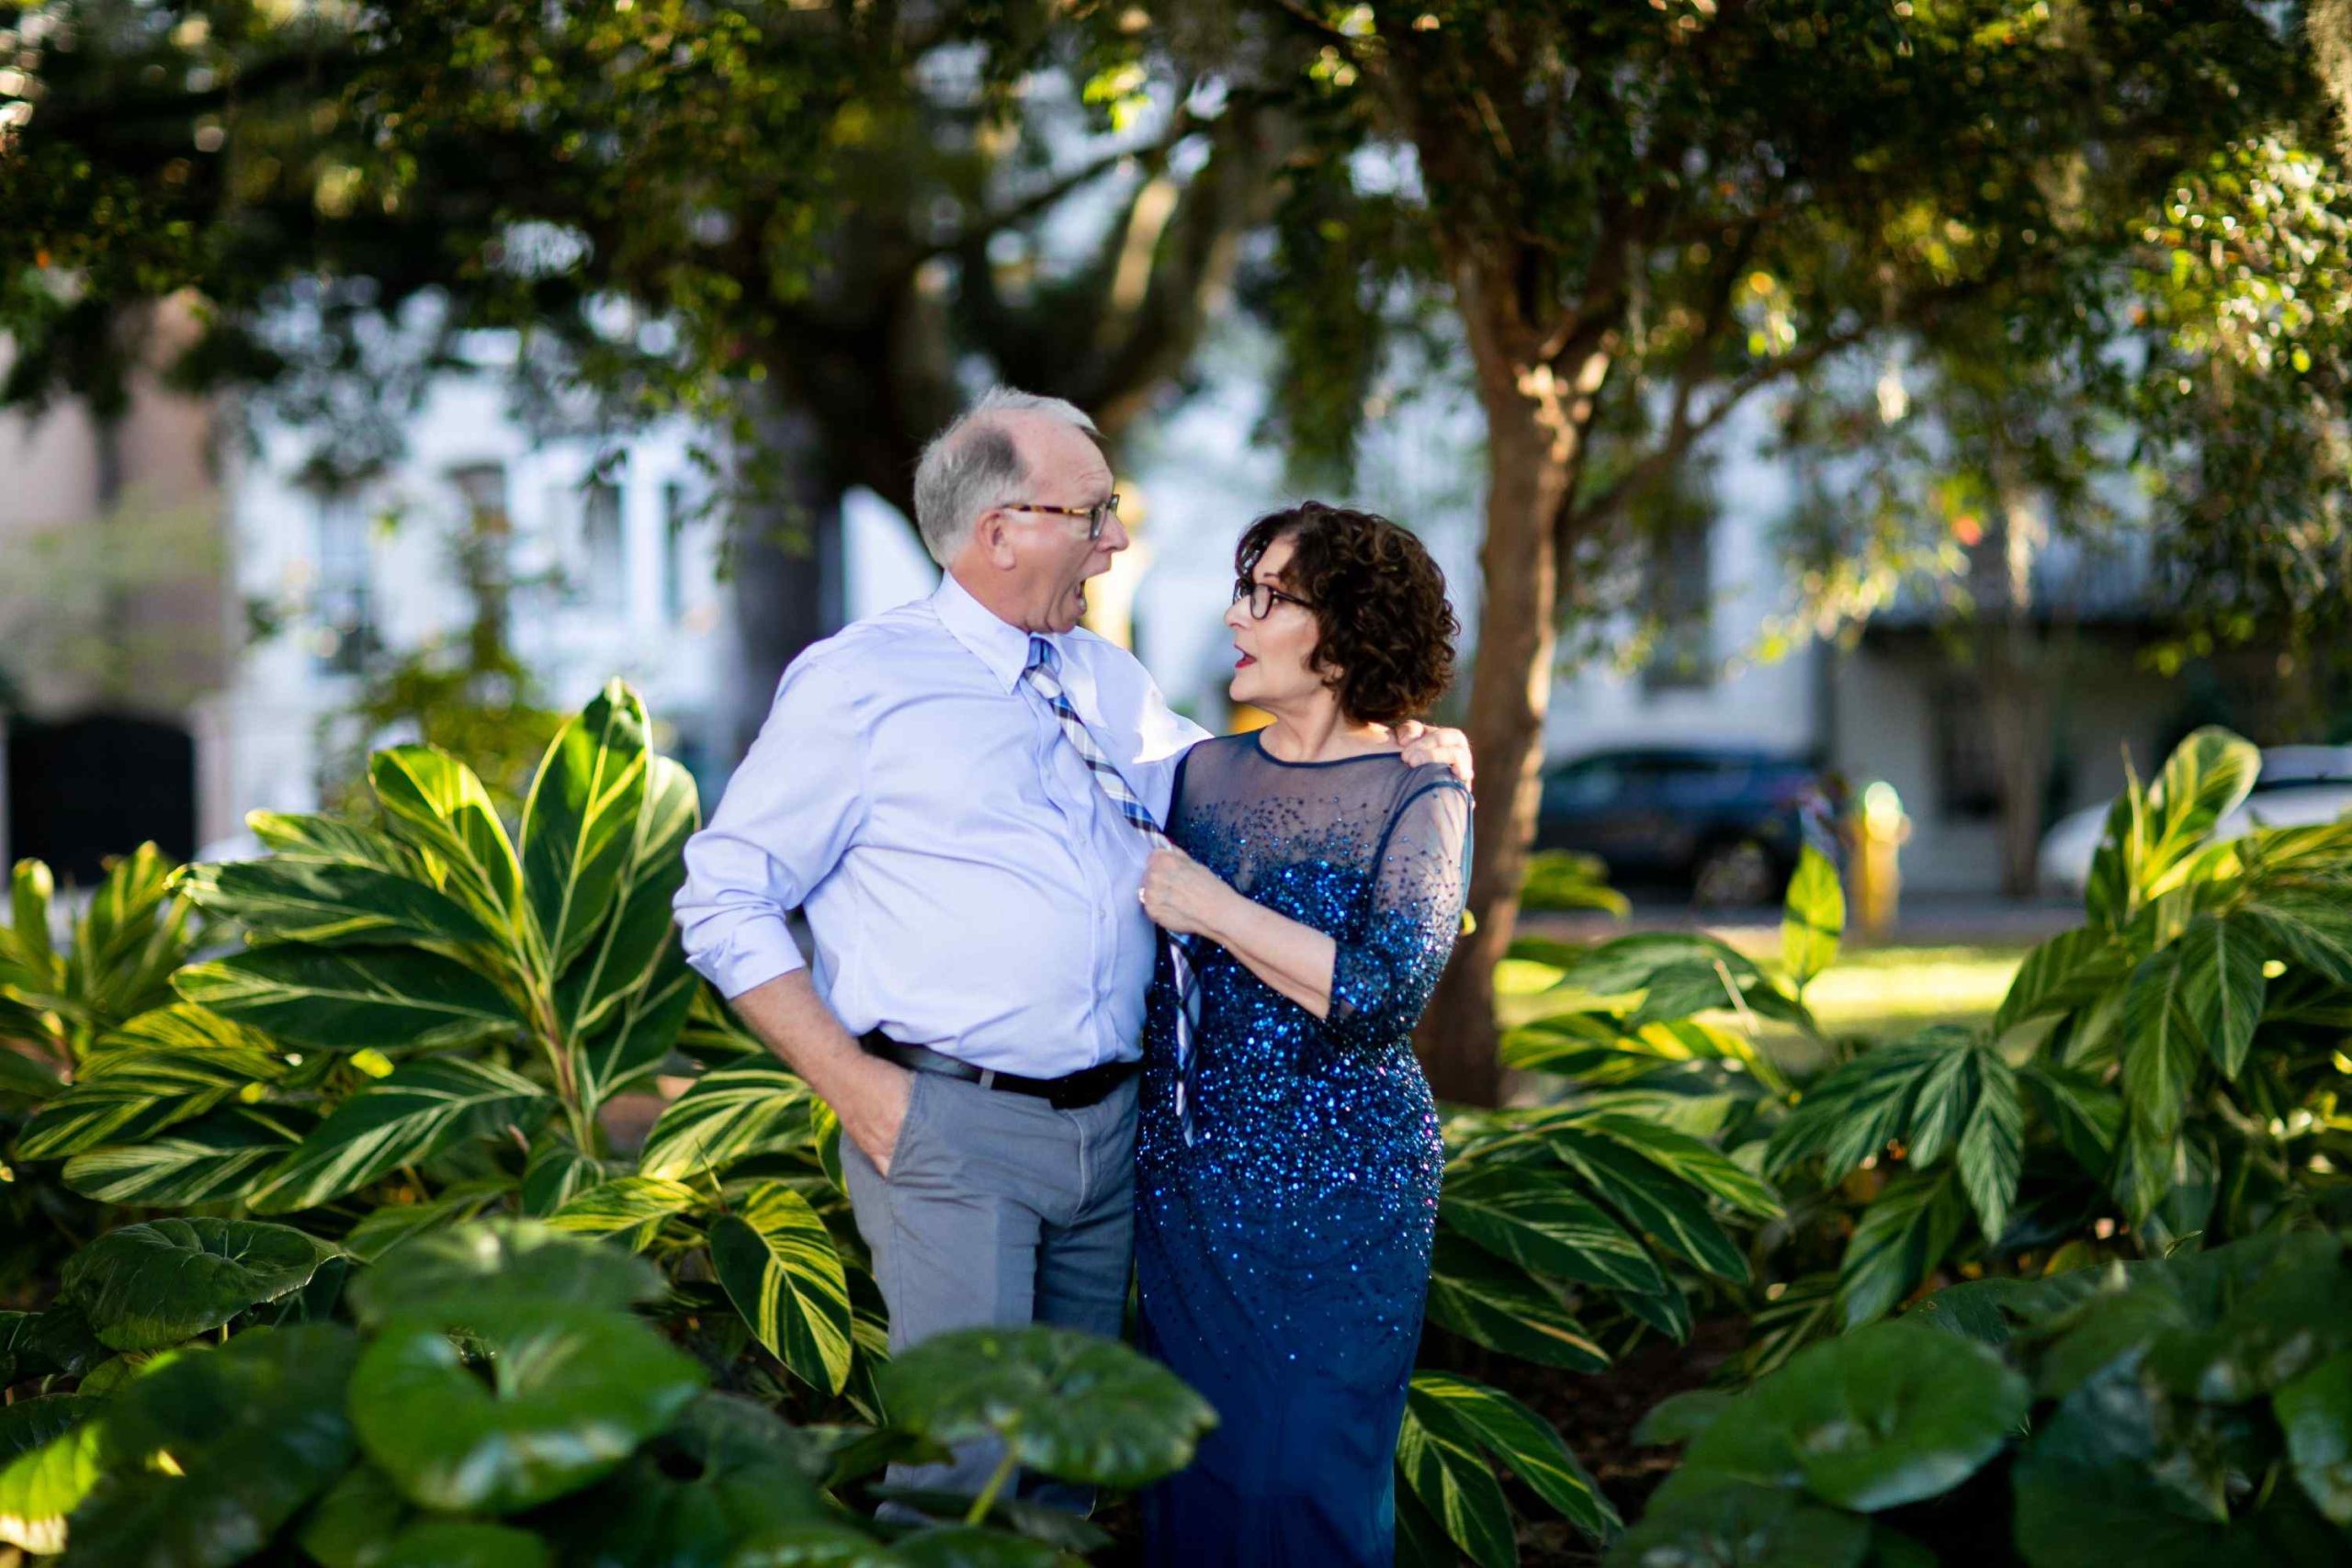 candid portrait of couples glamour session outdoors in Savannah